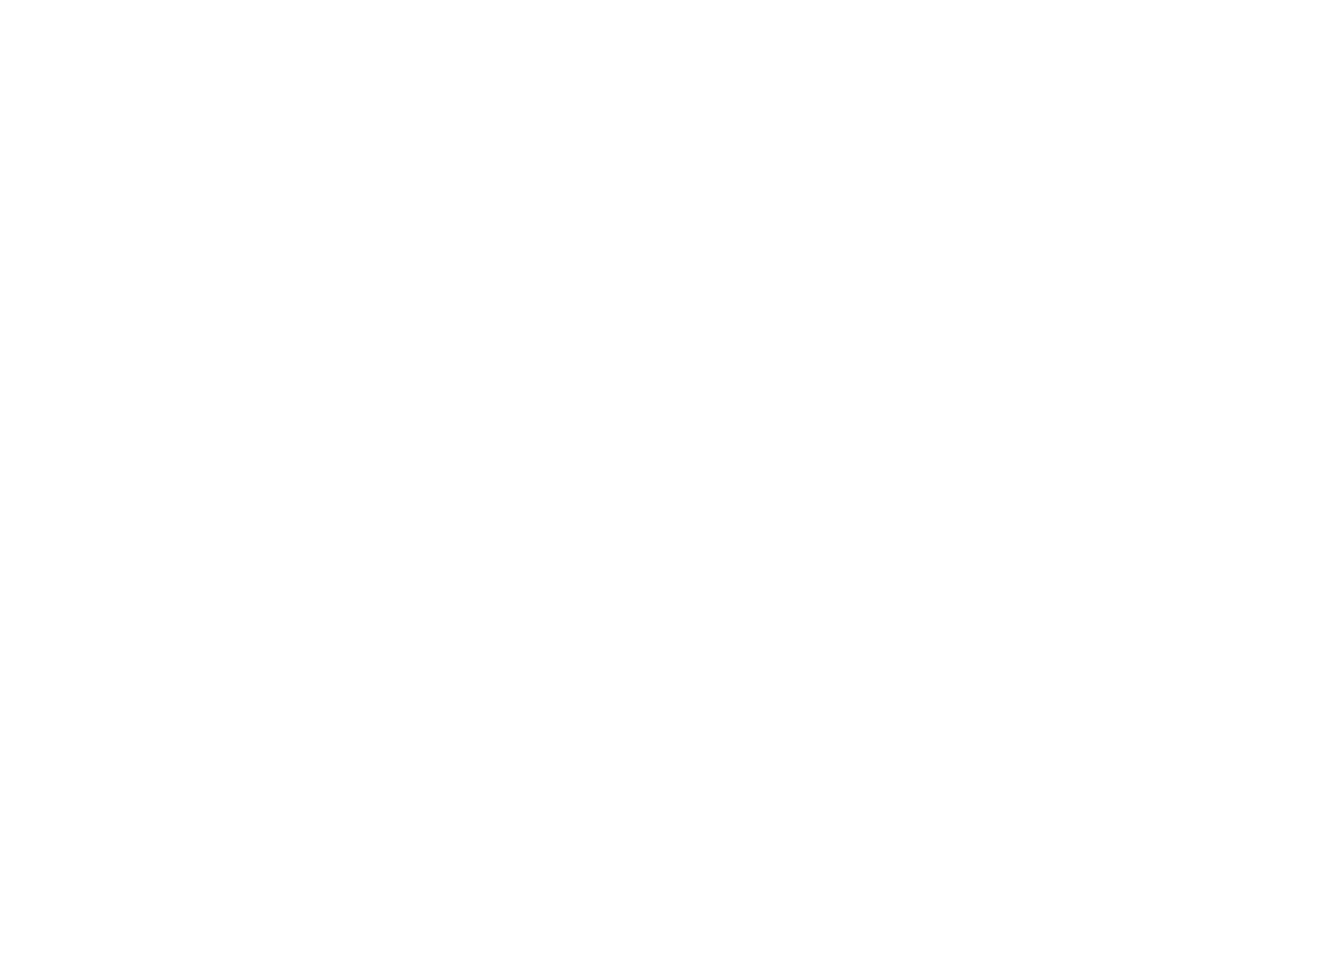 Levy - A Recipe For Change